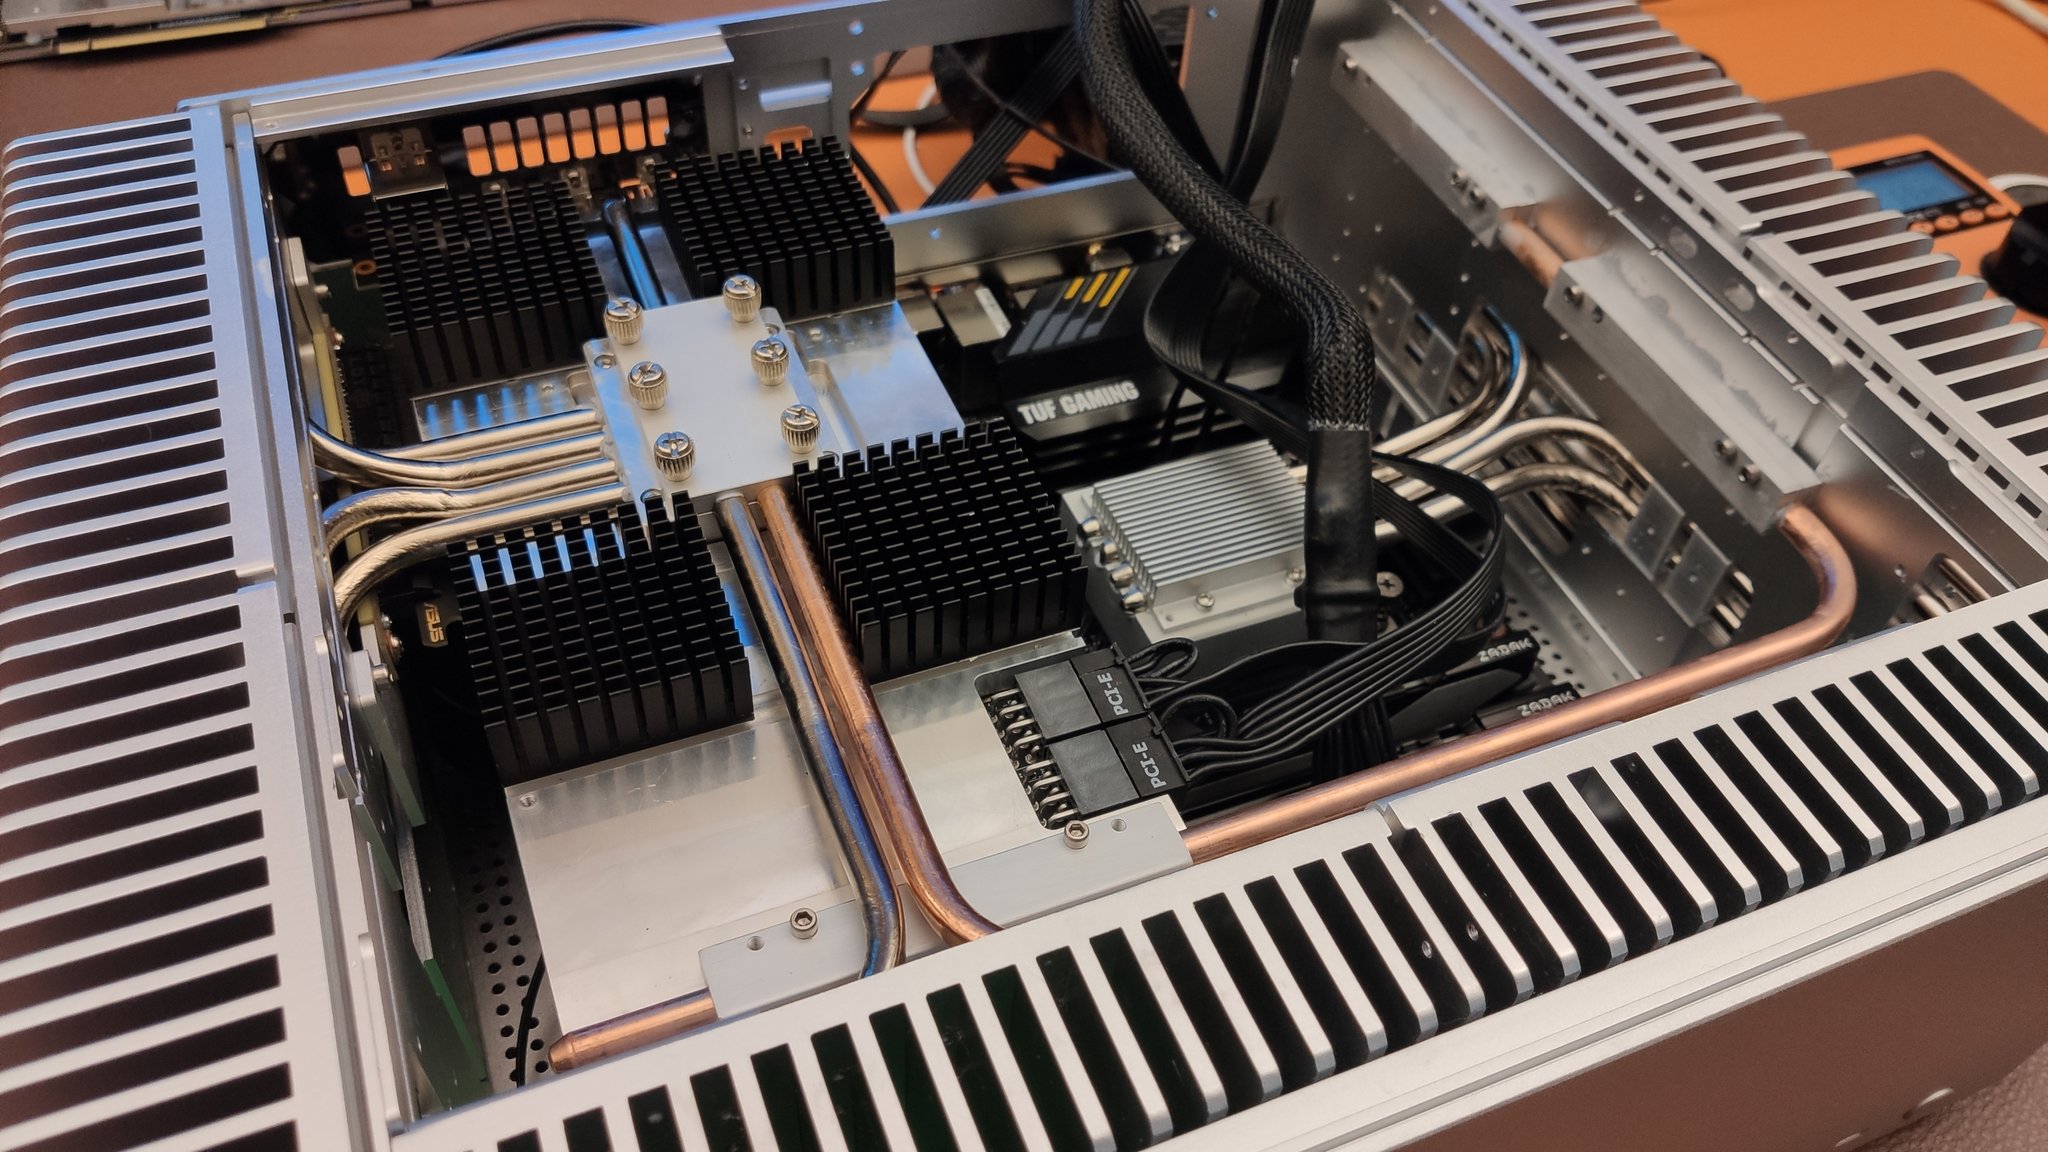 Passively-Cooled 3080 Comes Hefty Price | Tom's Hardware